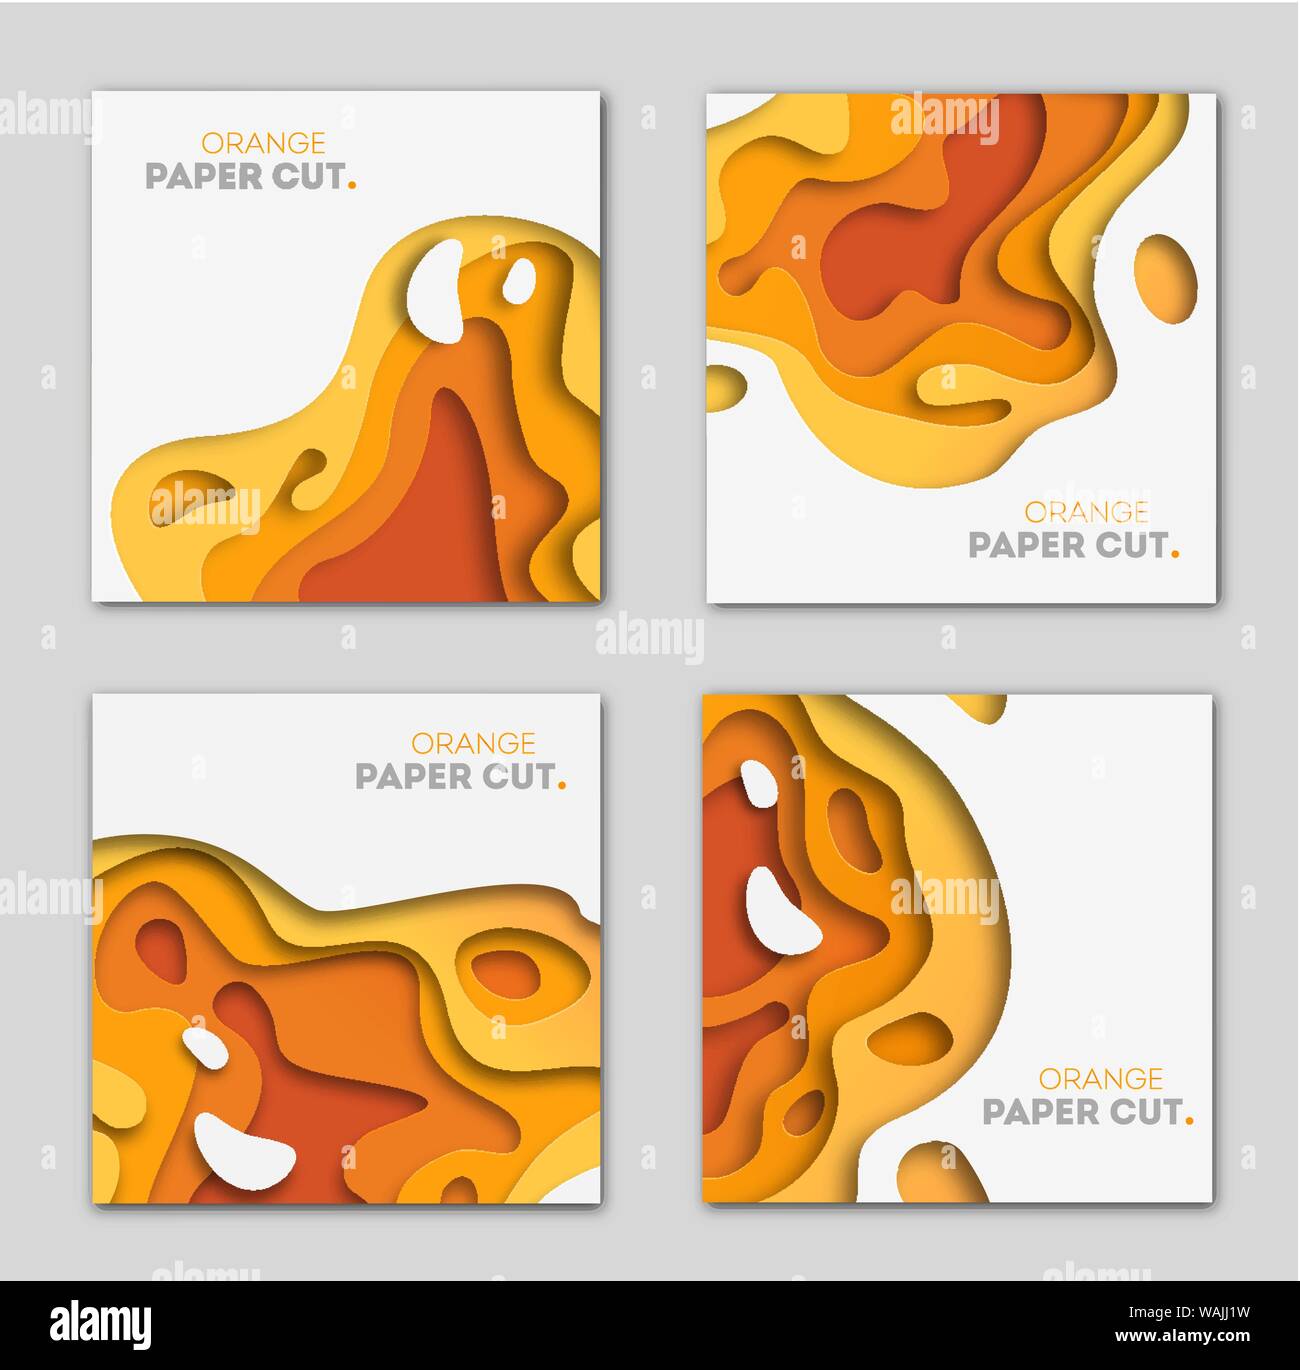 Download Banners Templates With Yellow Paper Cut Shapes Bright Autumn Modern Abstract Design Vector Illustration Eps 10 Stock Vector Image Art Alamy